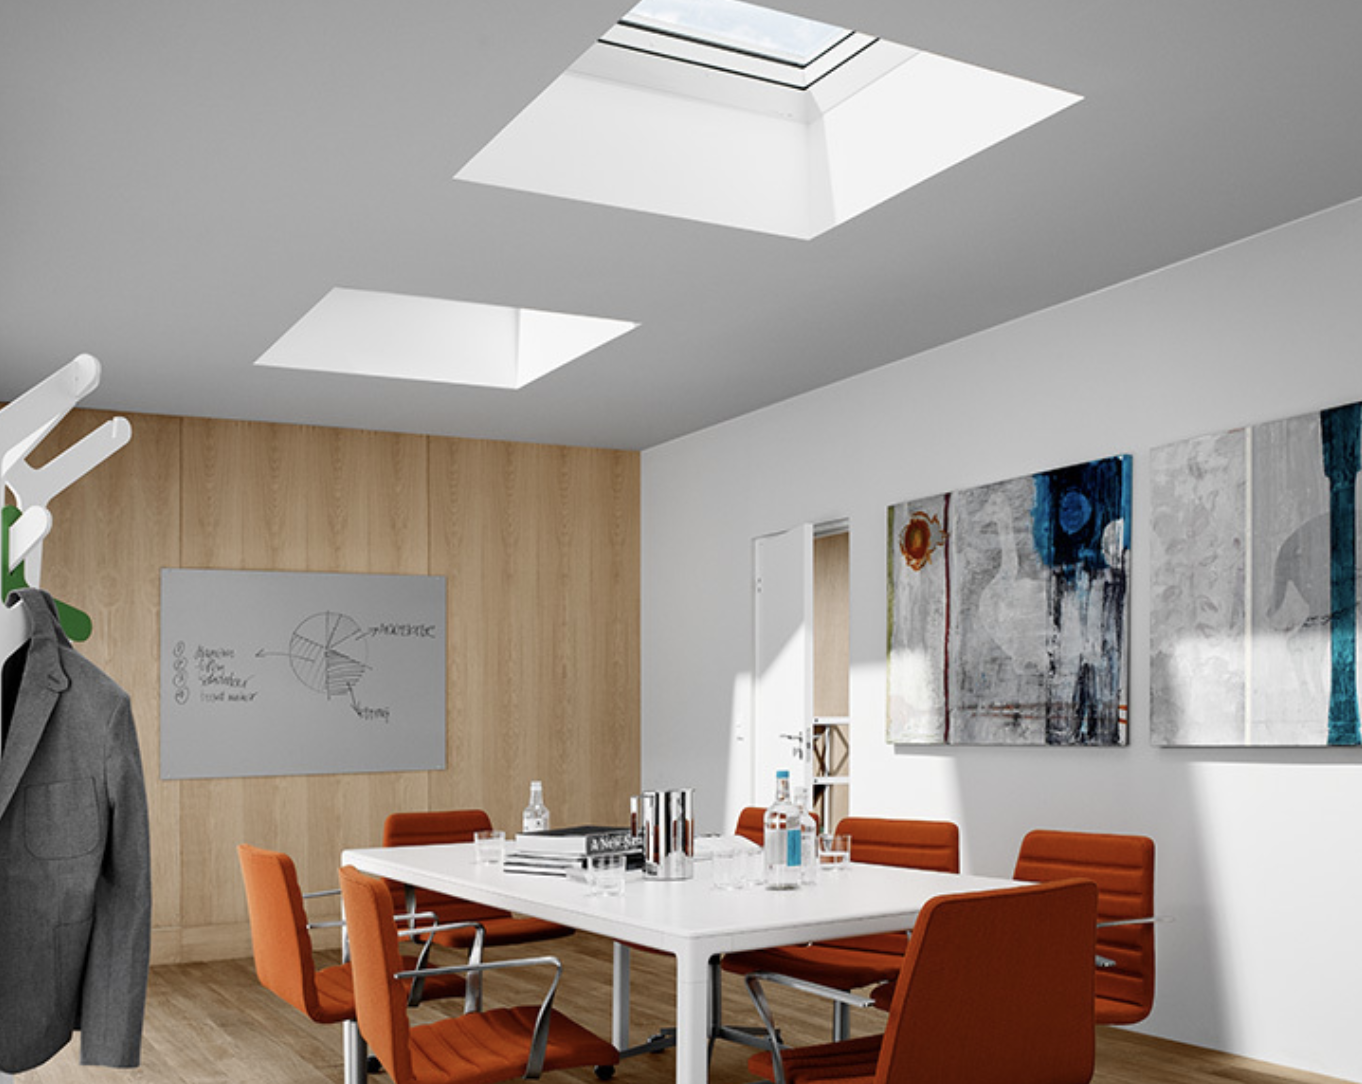 VELUX Skylights by DryHome Roofing & Siding, Inc DryHome Roofing & Siding, Inc. Sterling (703)230-7663